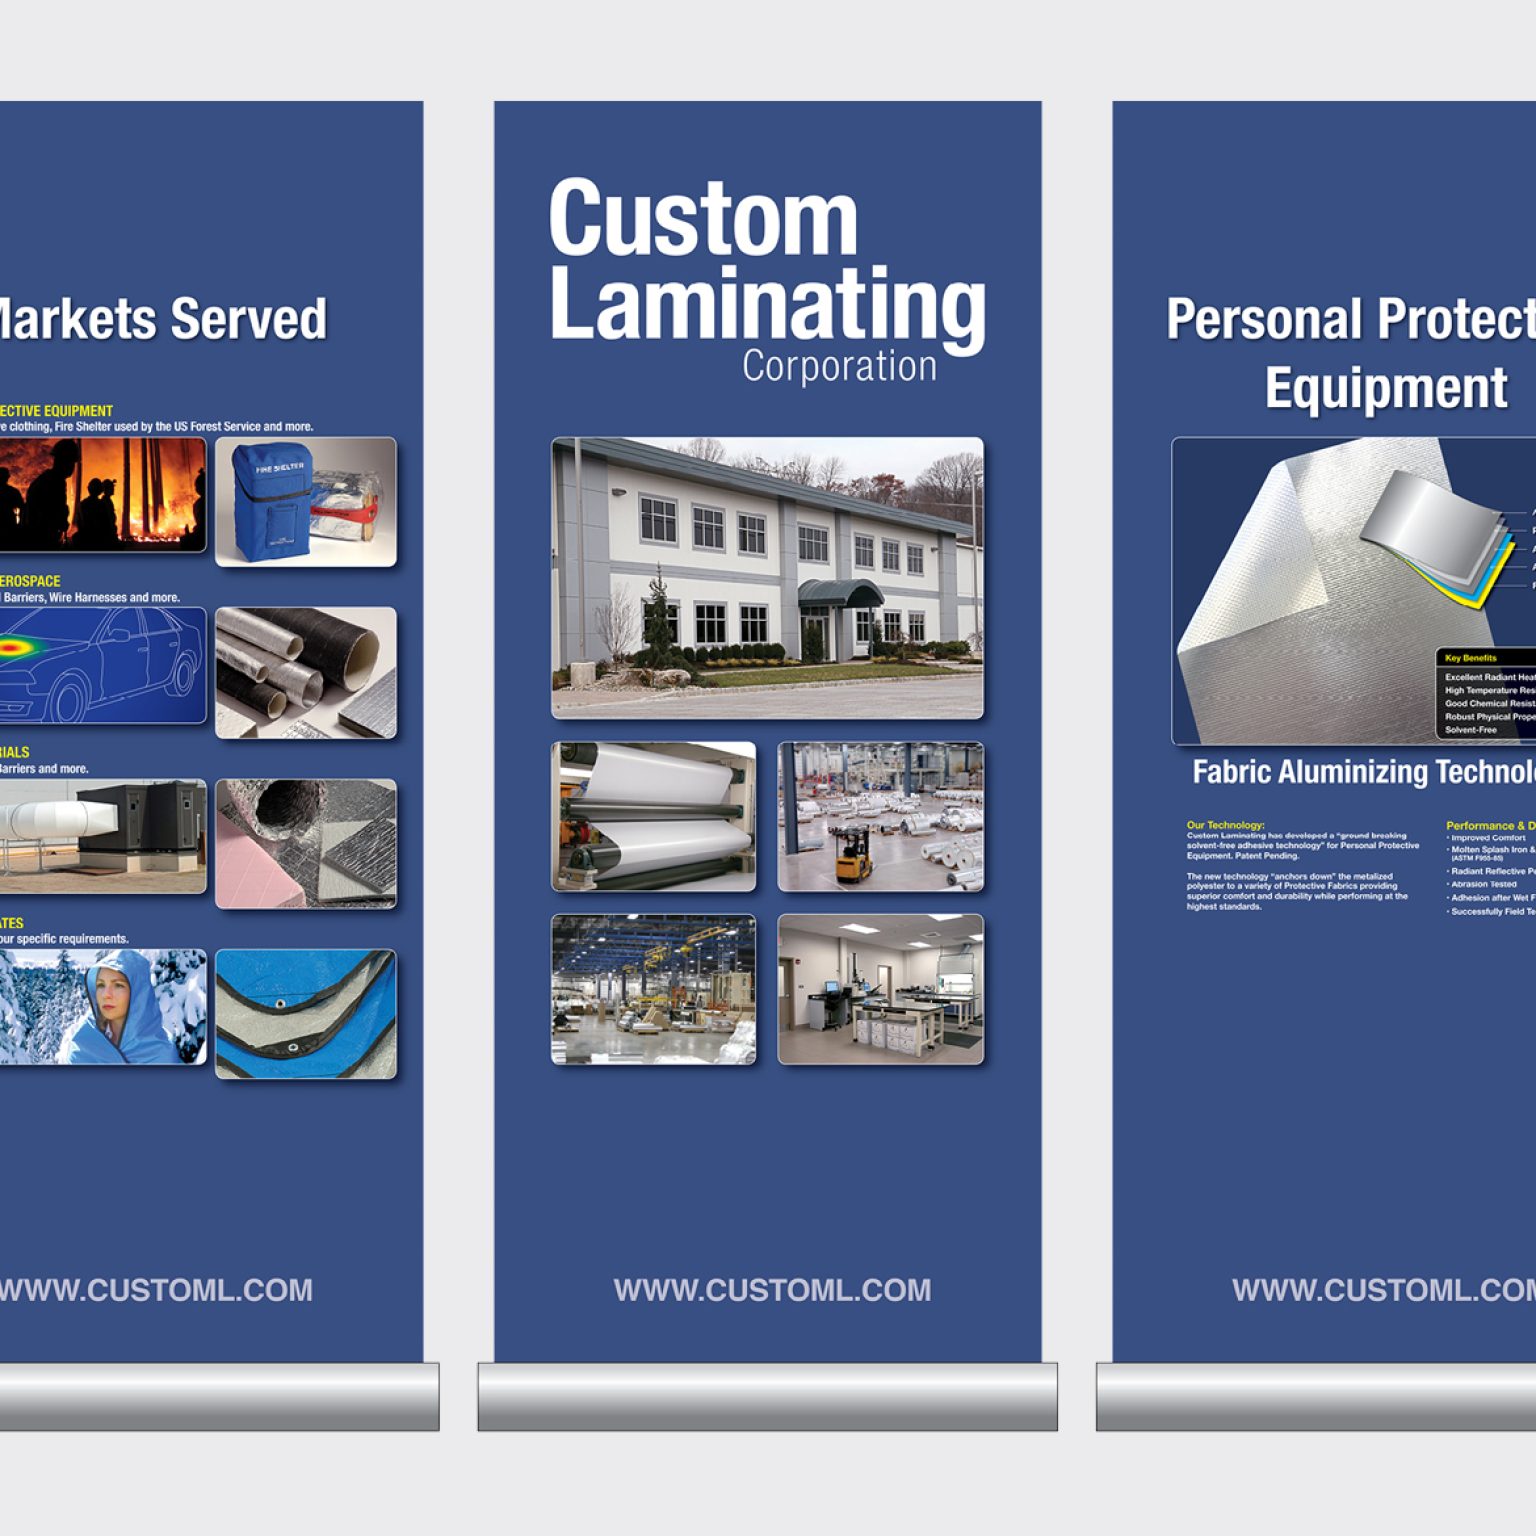 Marketing trade show banners for Custom Laminating Corporation